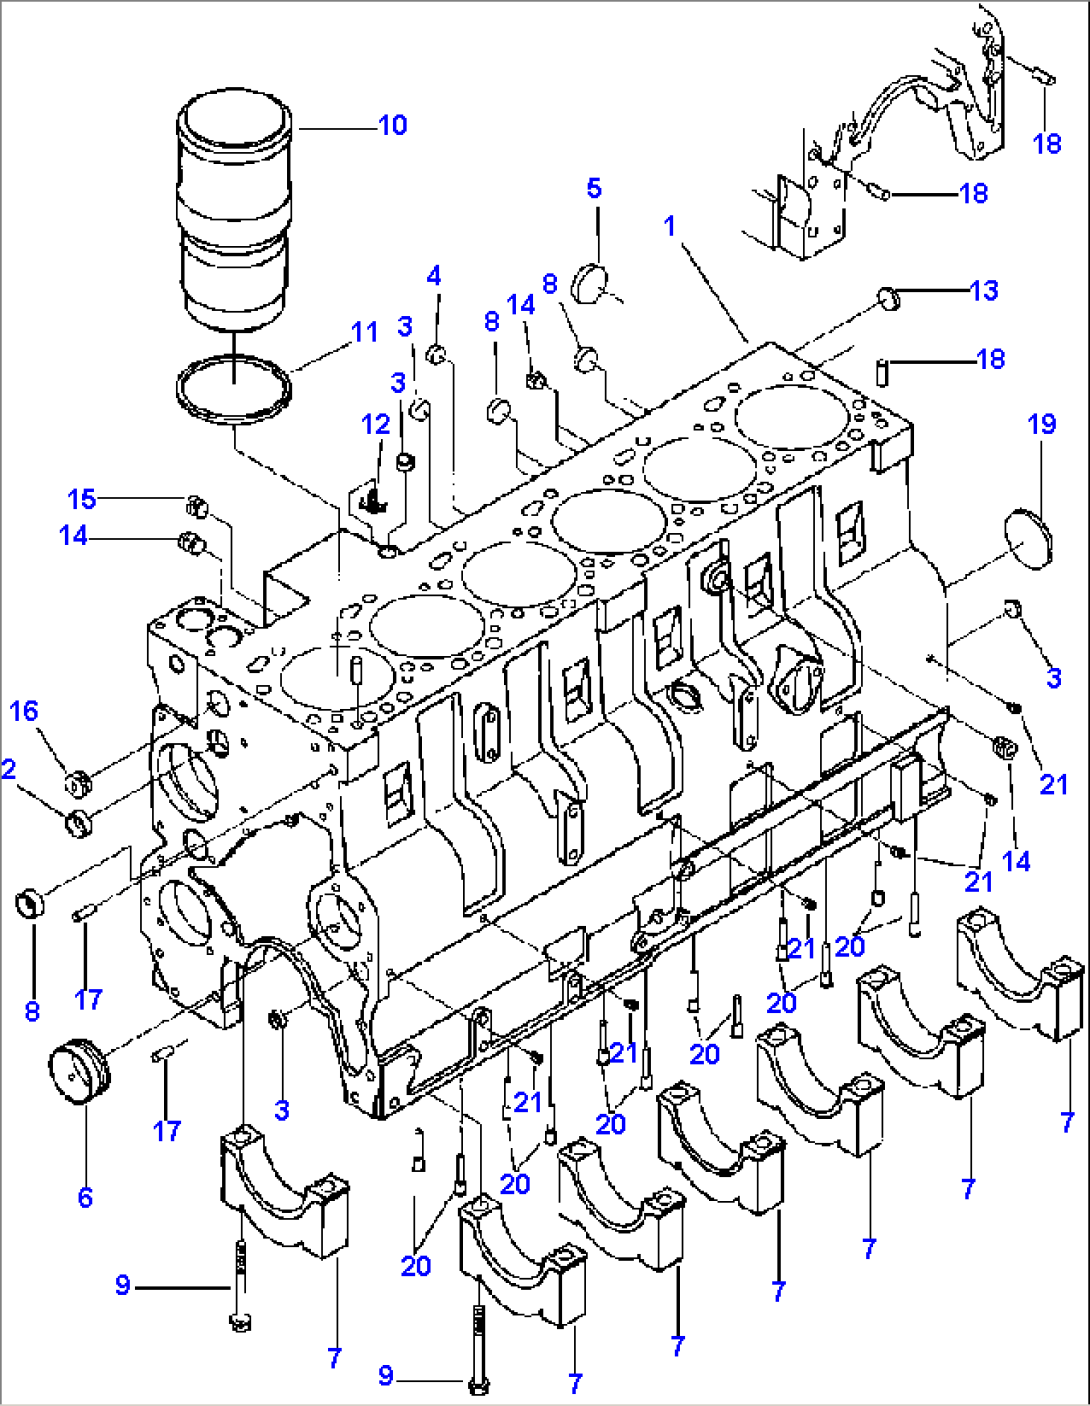 FIG. A2103-A3A2 CYLINDER BLOCK - SQUARED MAIN BEARING CAP